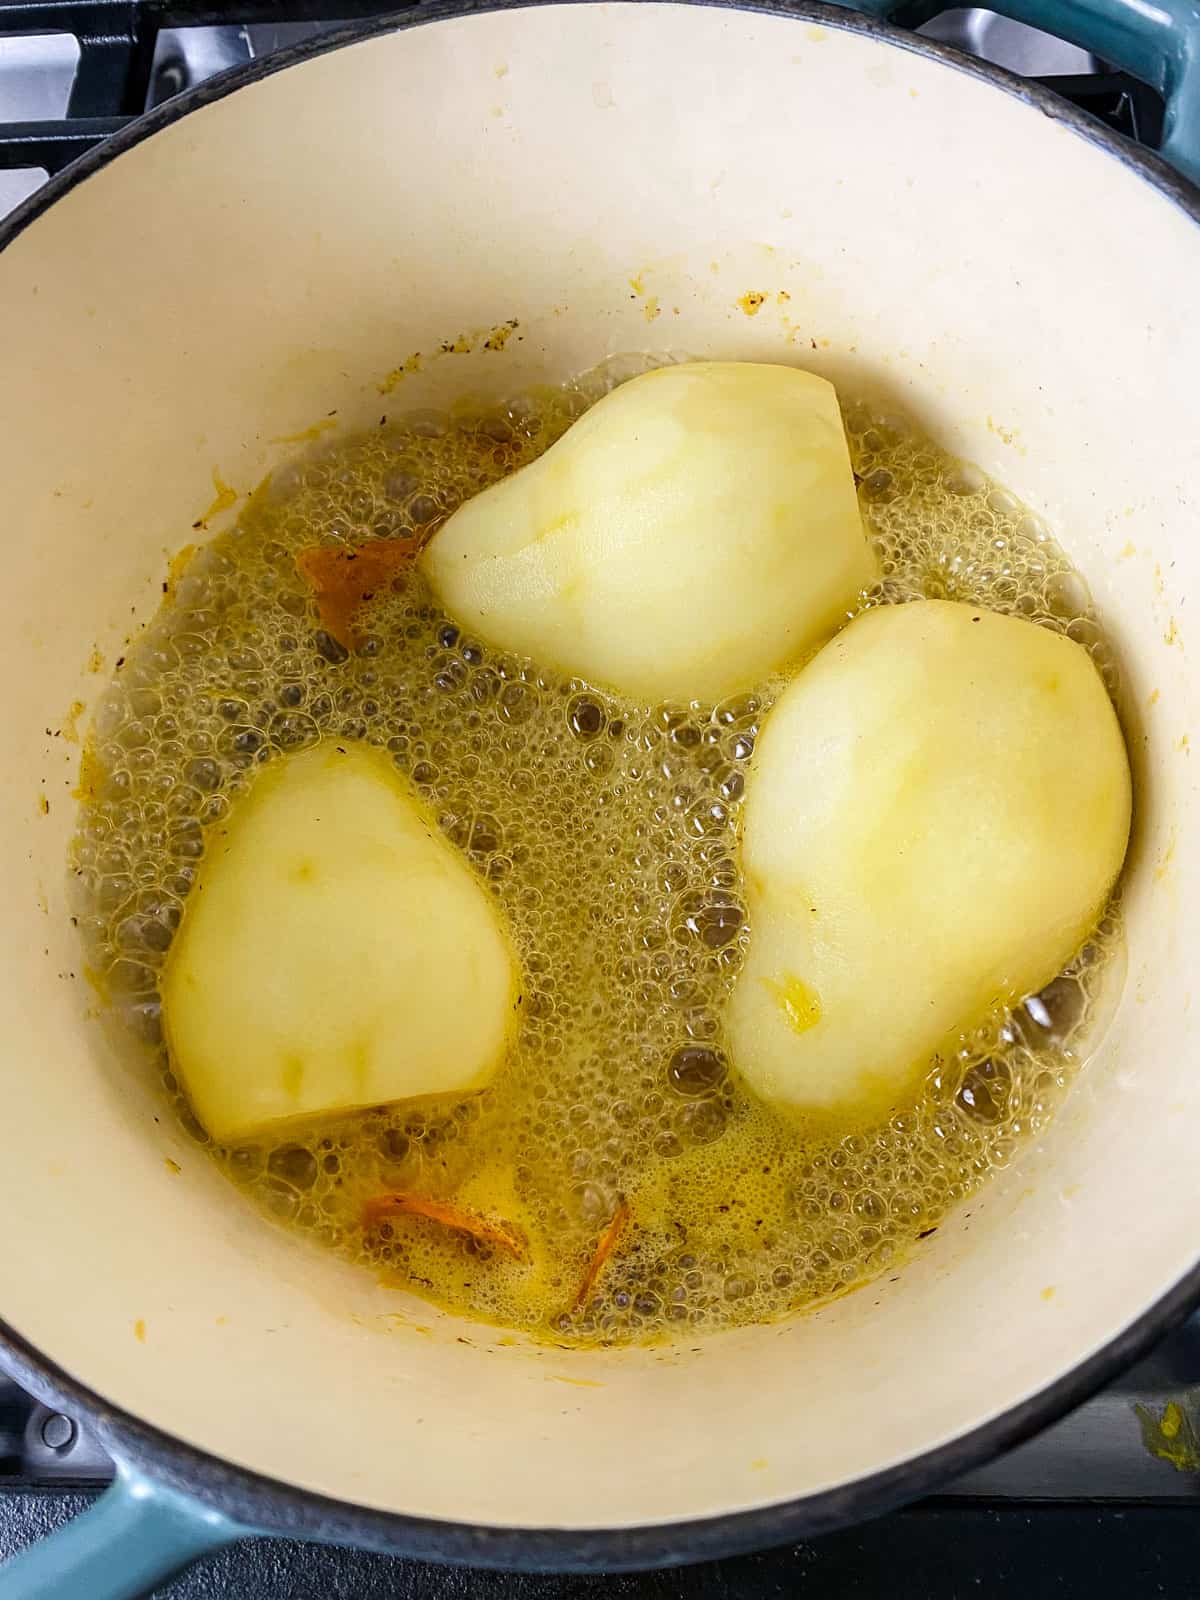 Simmer the peeled pears in the wine poaching liquid until tender and sauce has reduced.